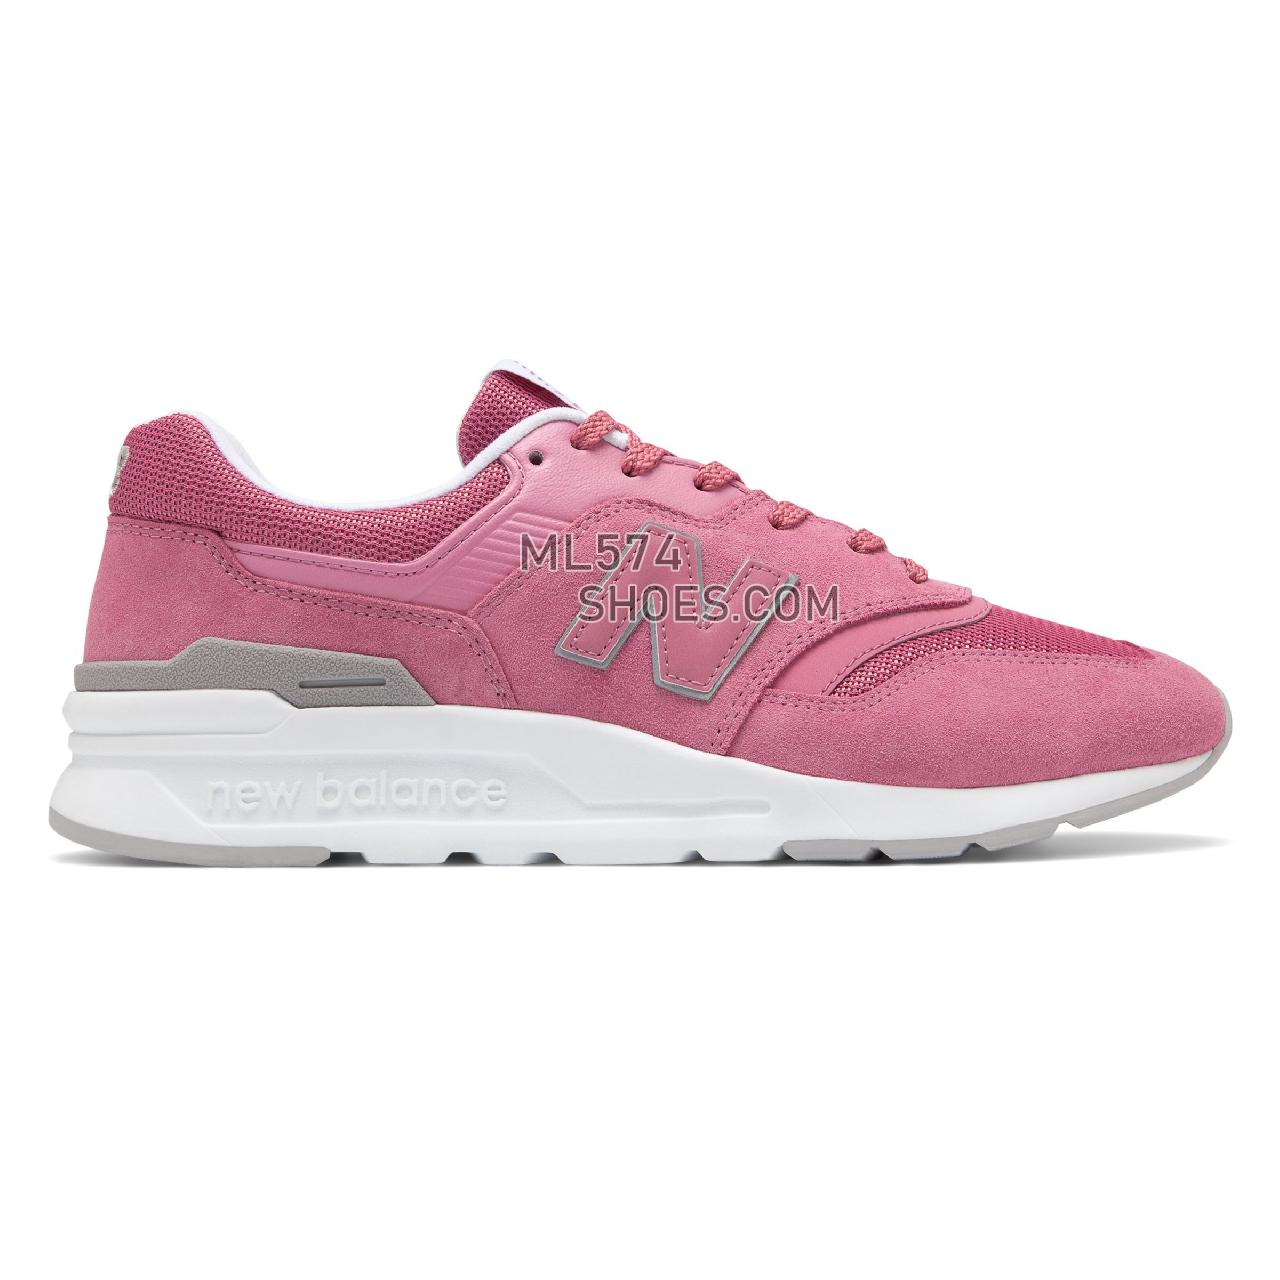 New Balance 997H - Men's Classic Sneakers - Mineral Rose with Light Cyclone - CM997HMA